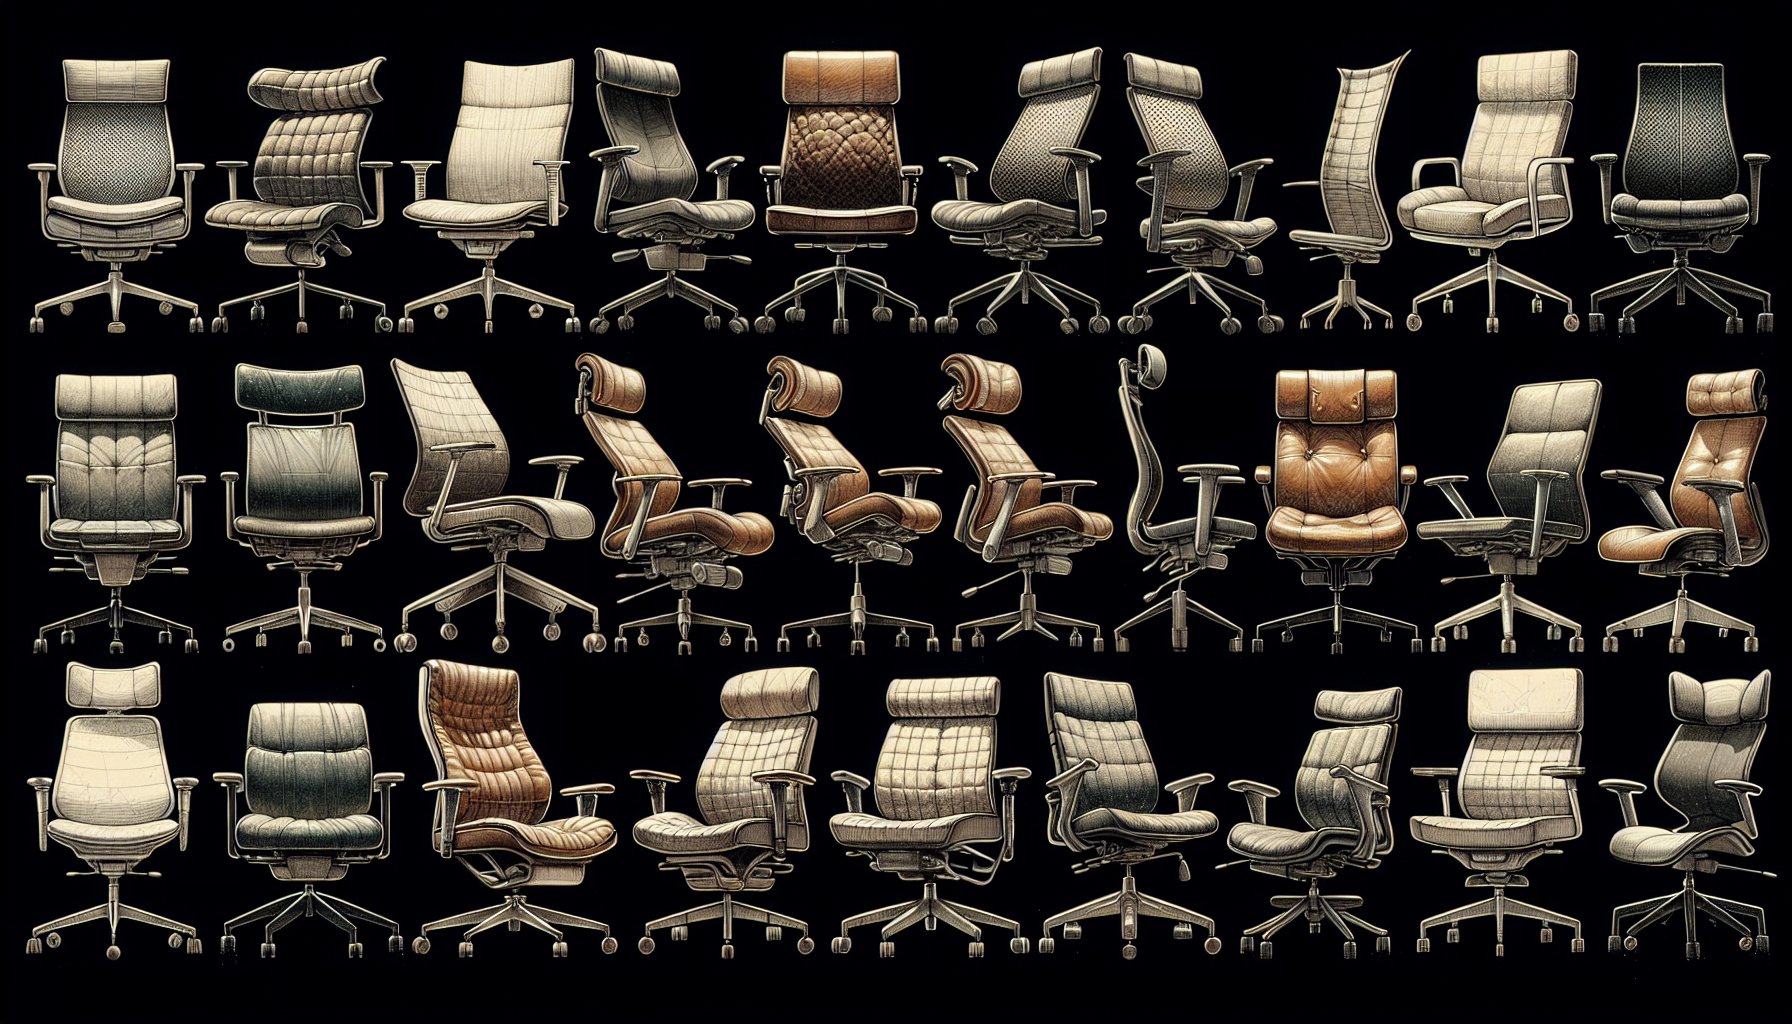 Illustration of ergonomic and stylish used office chairs in Austin